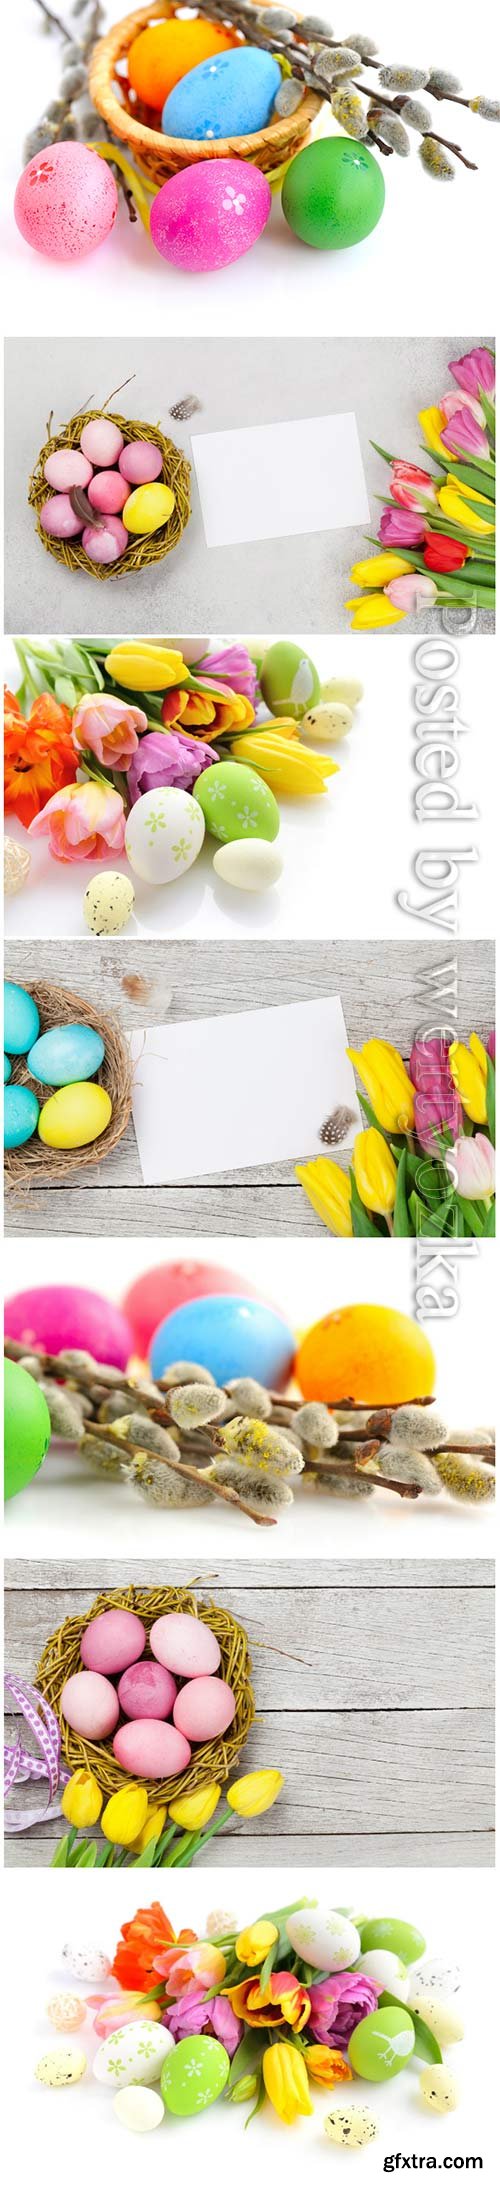 Happy Easter stock photo, Easter eggs, spring flowers # 8